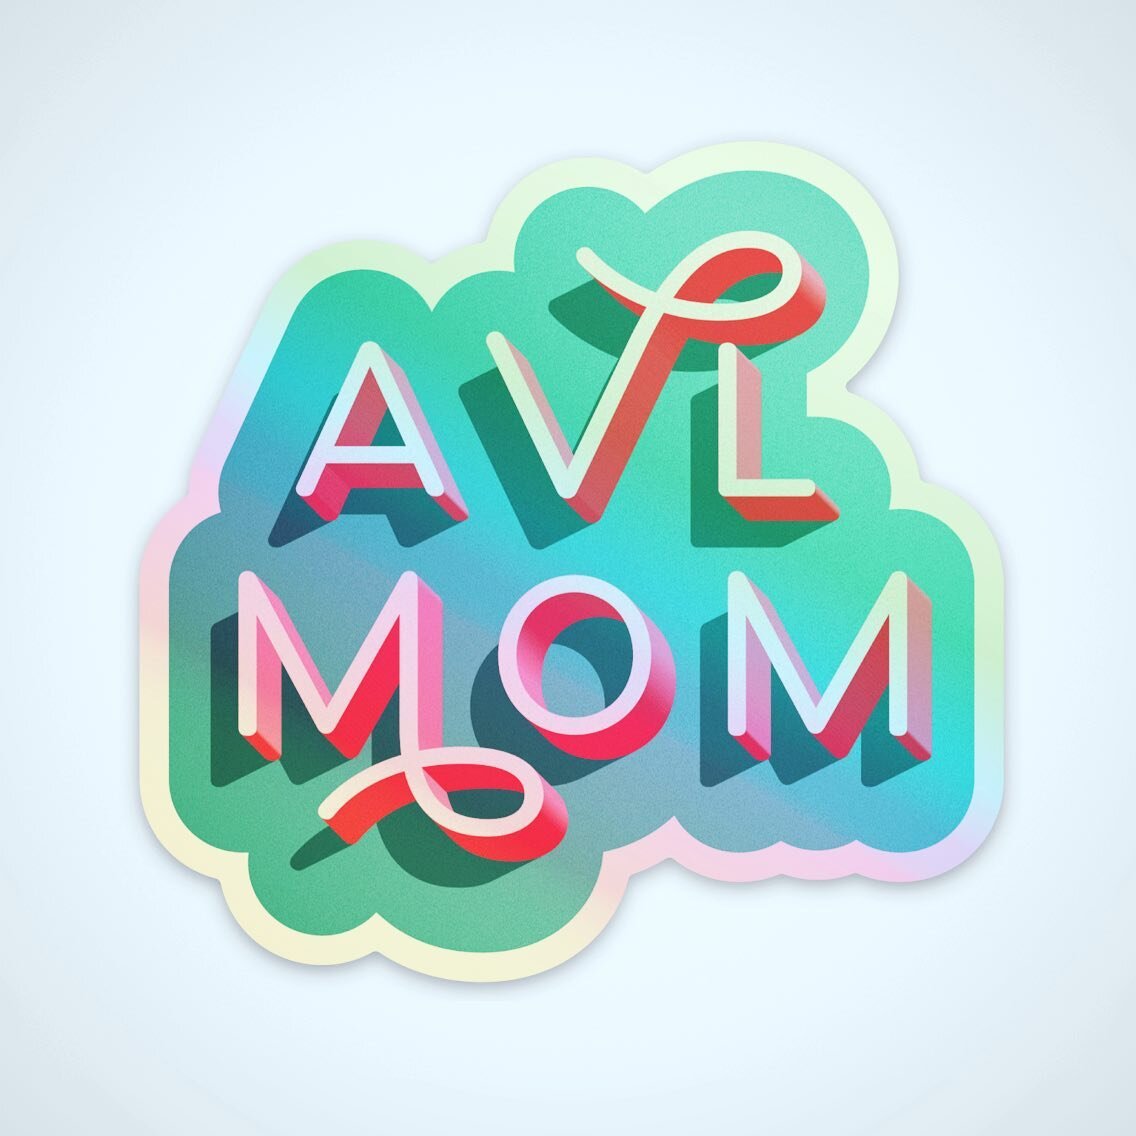 AVL MOM holographic stickers have arrived! Let me know if want one. Thanks @stickermule they turned out perfect! #avlmom #avlmoms #ashevillemom #ashevillemoms